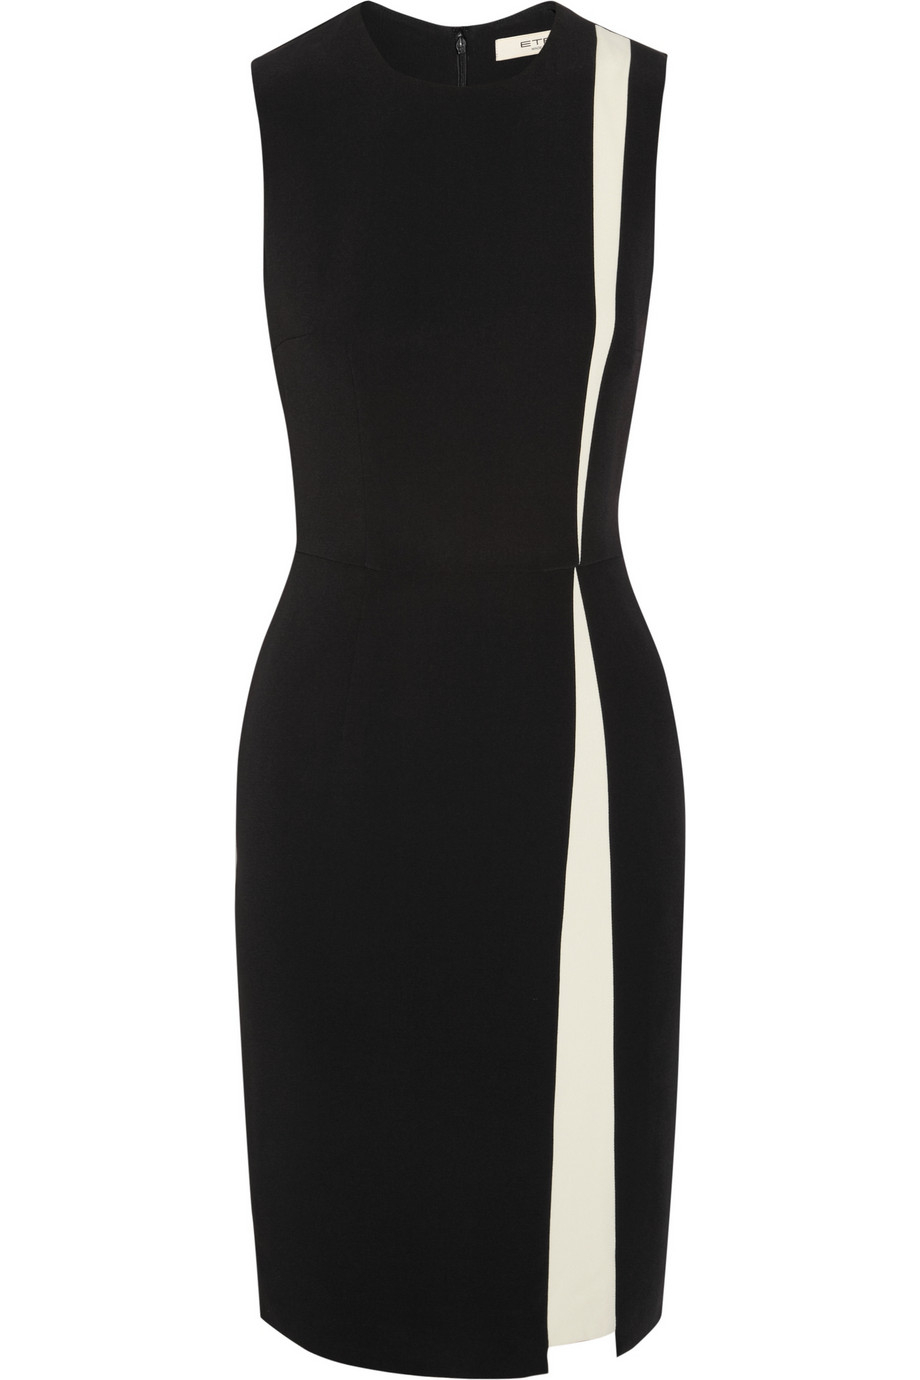 Etro Two-Tone Stretch-Jersey Dress in Black (White) - Lyst